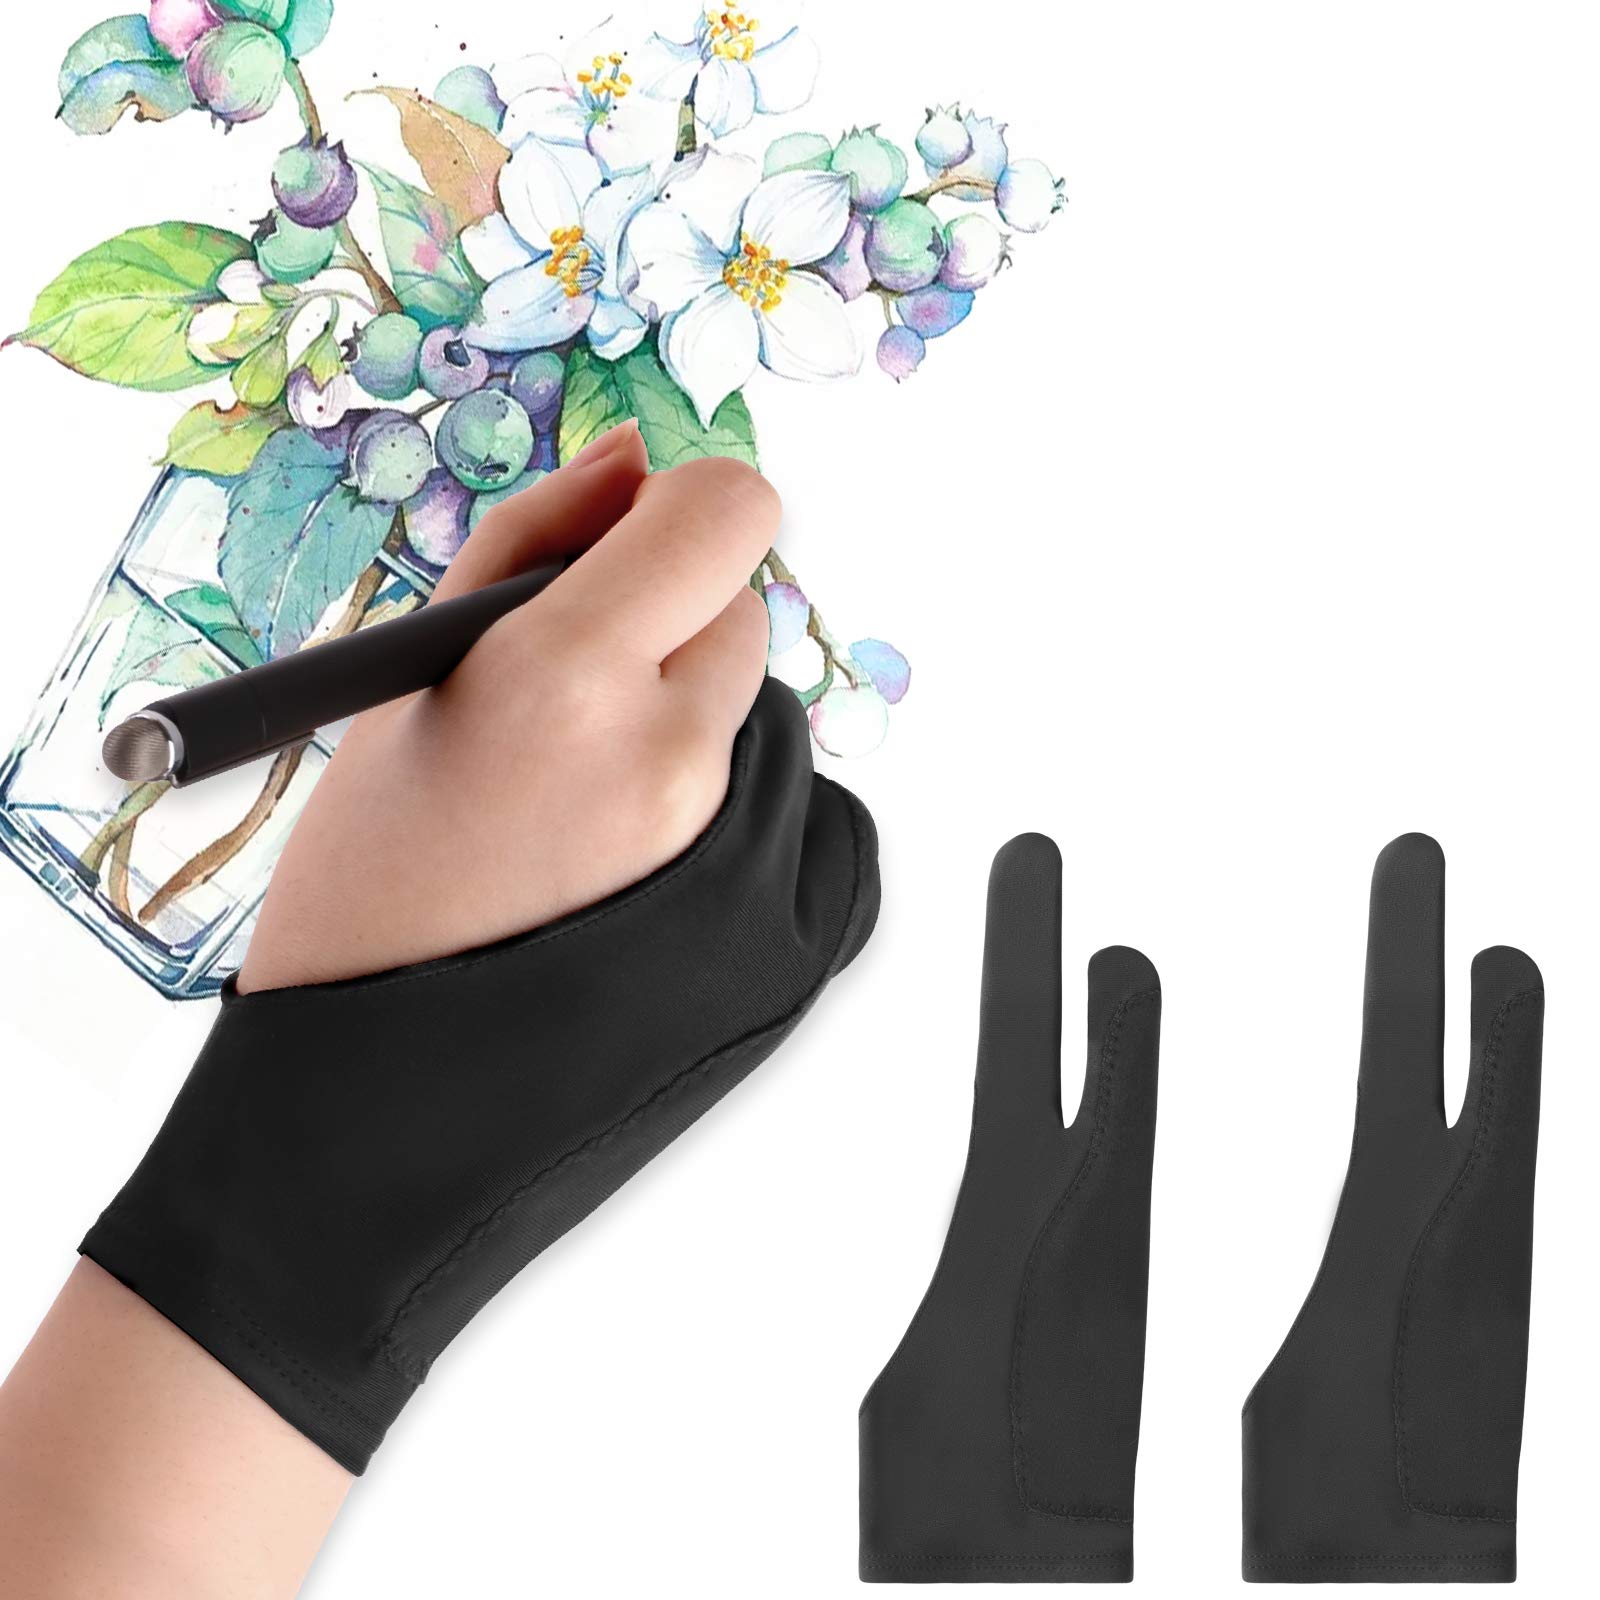 Huion Anti-fouling Drawing Glove For Graphics Tablet Pen Monitor